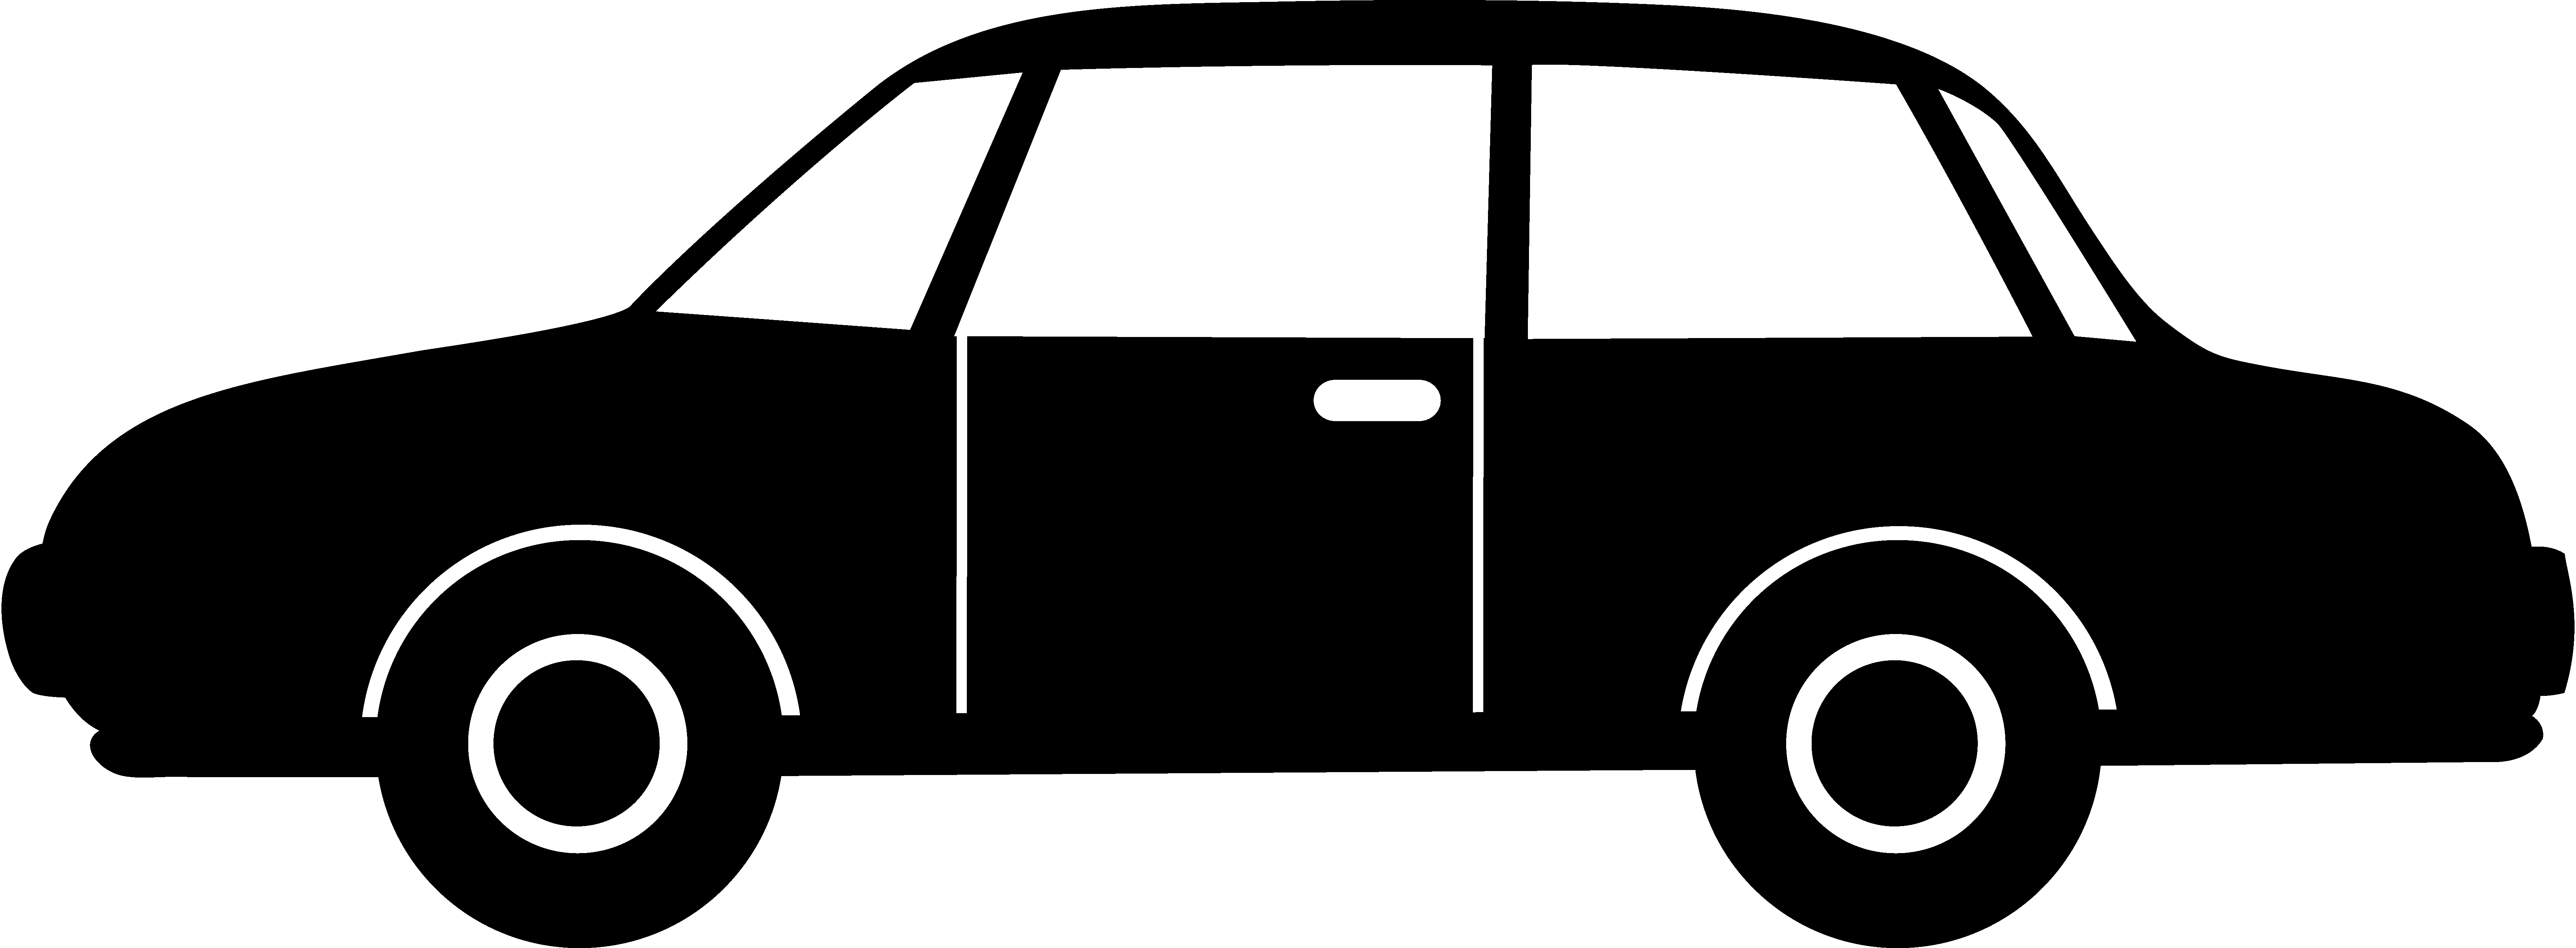 Sports Car Clipart Black And White | Clipart Panda - Free Clipart ...